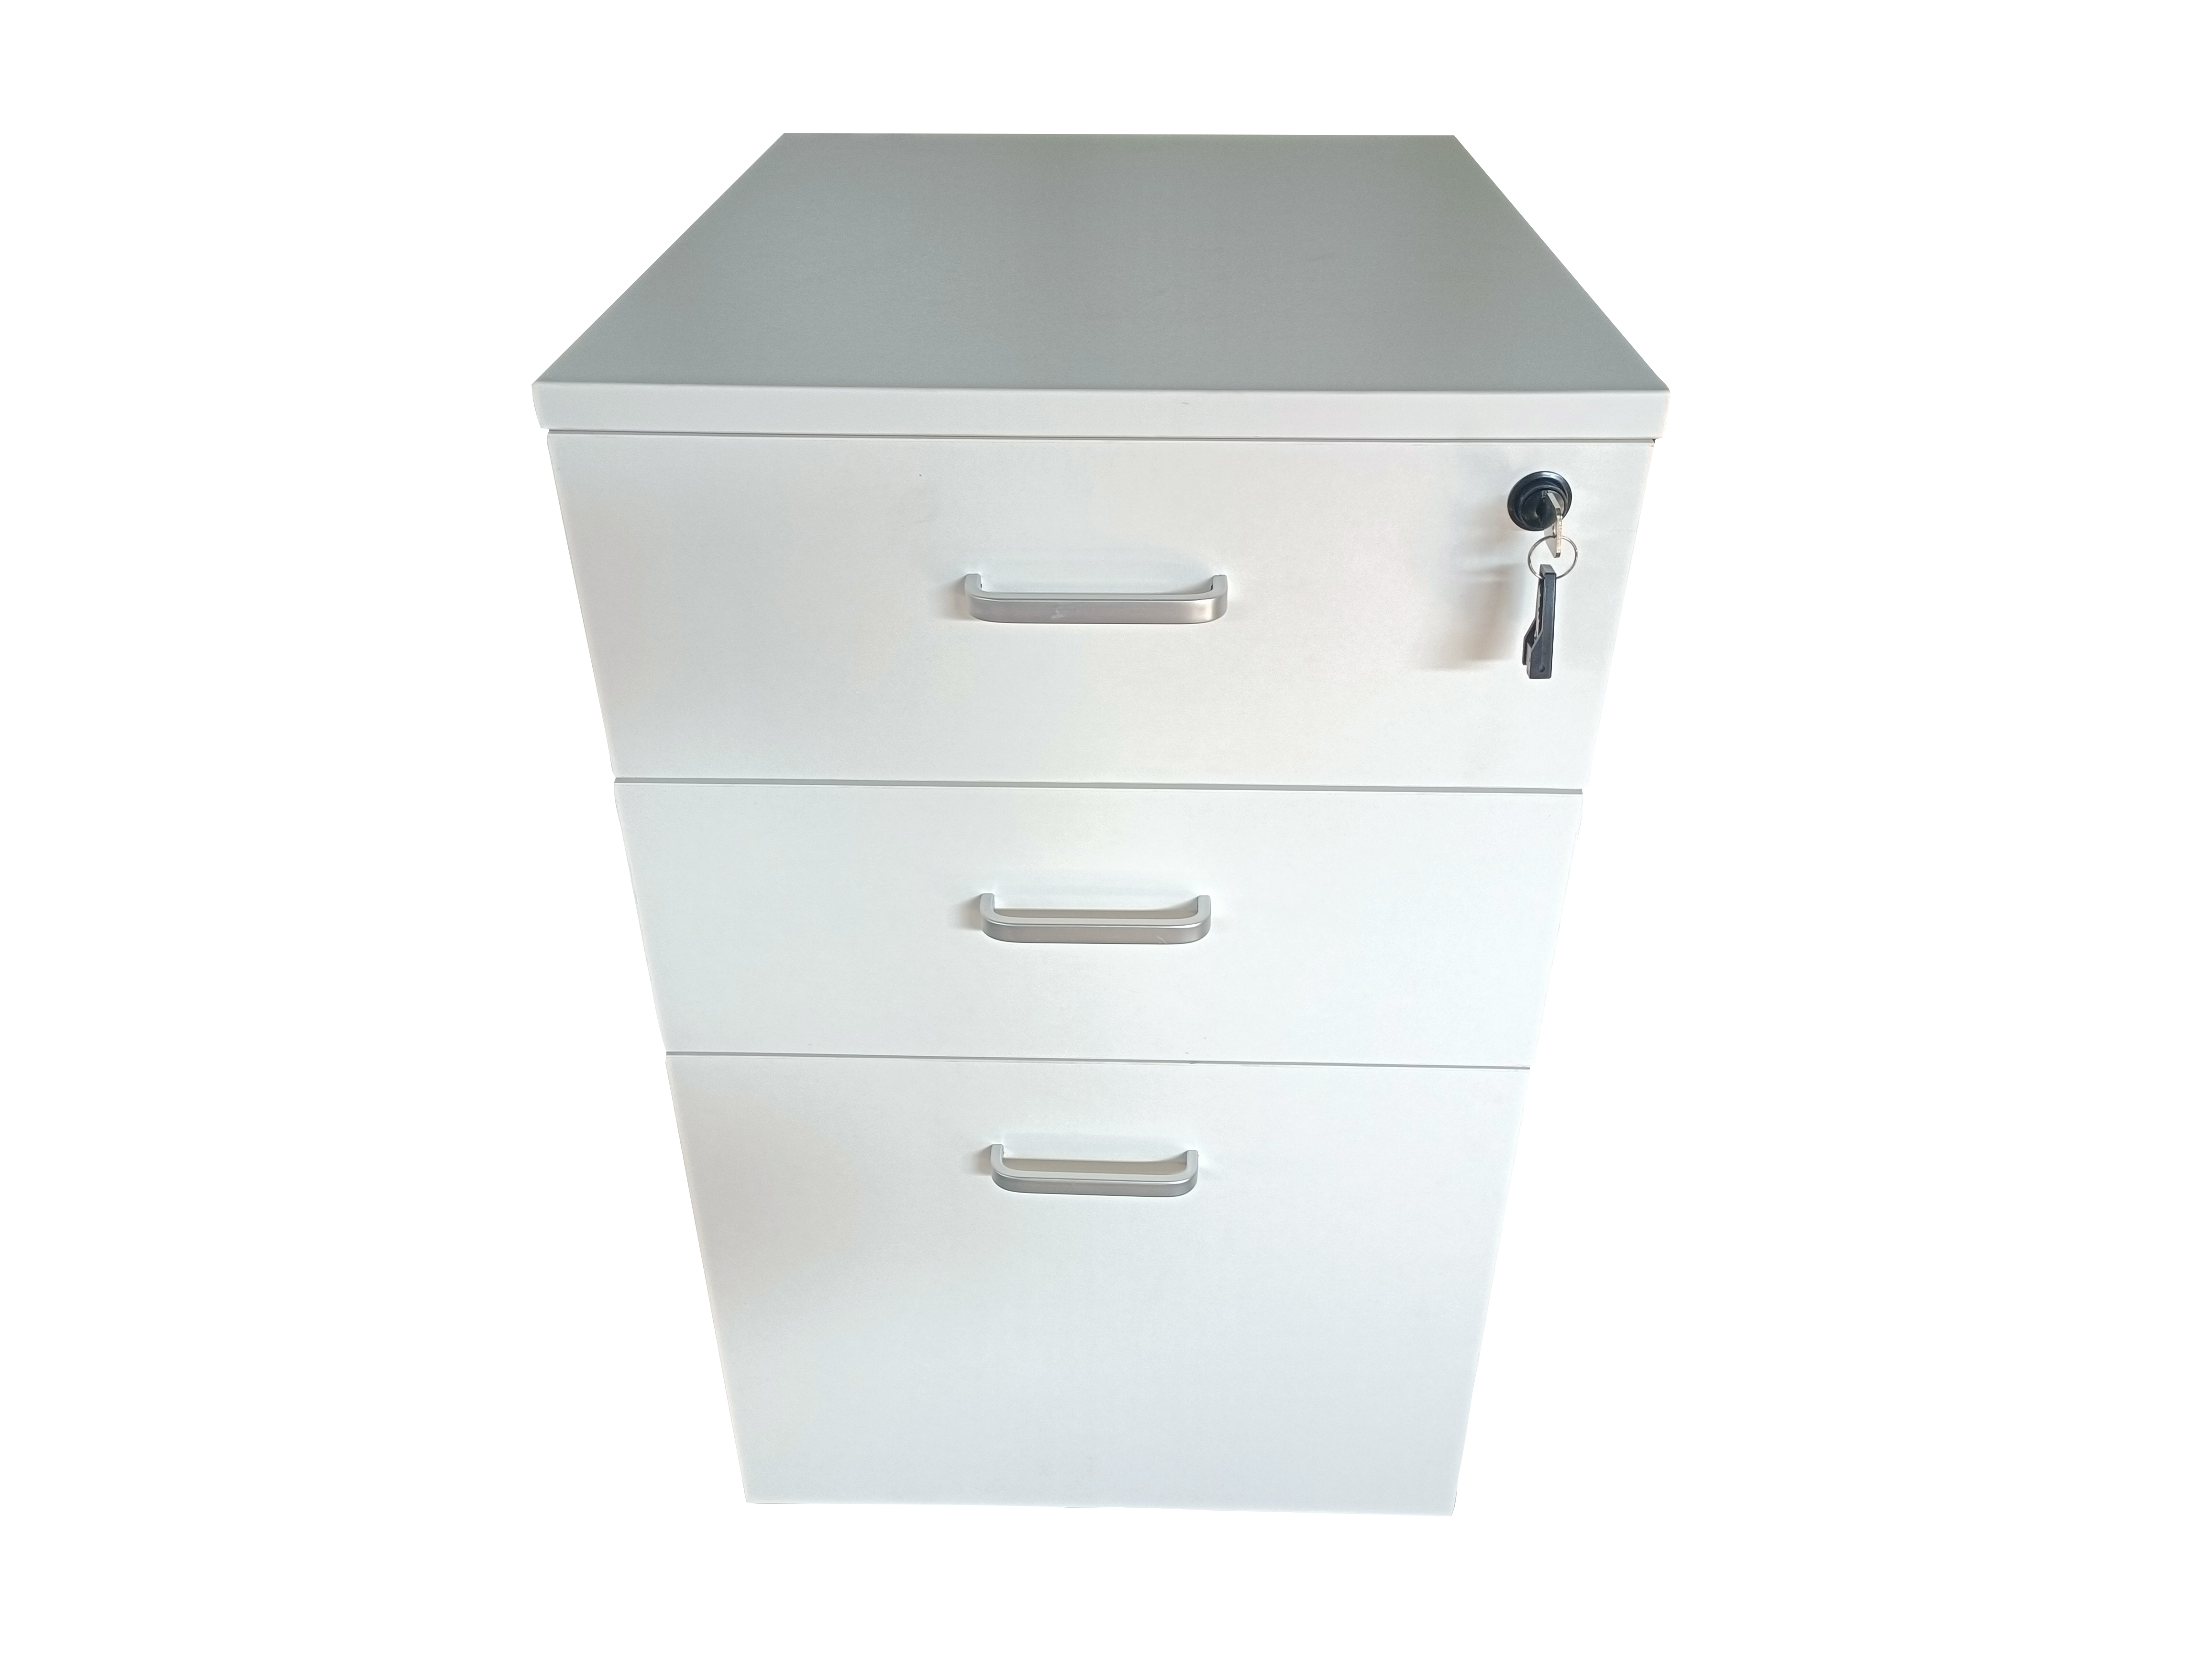 Airali Office filing cabinet Black/White/Red oak 417*500*677mm (without desk)